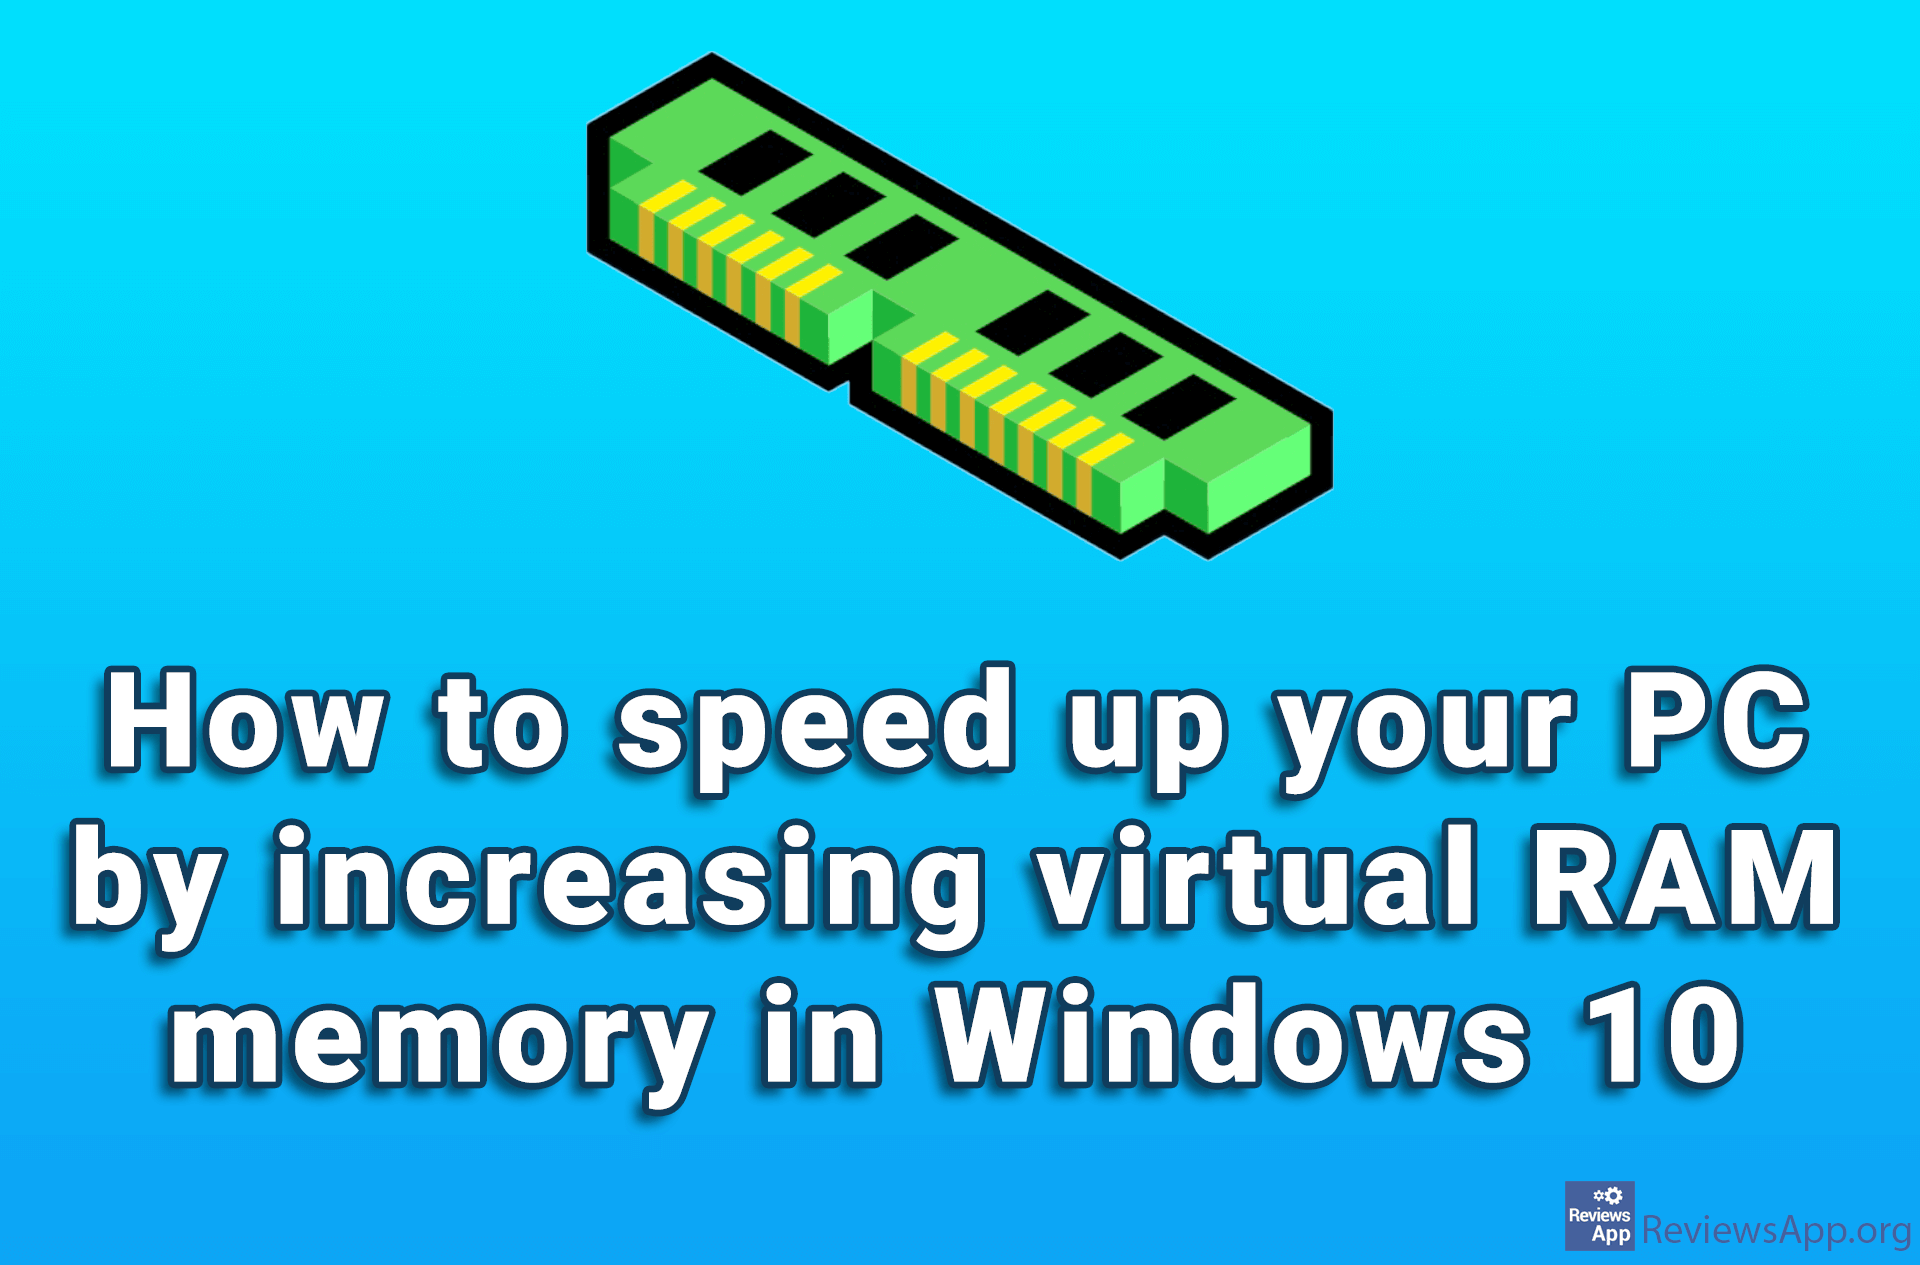 How to speed up your PC by increasing virtual RAM memory in Windows 10